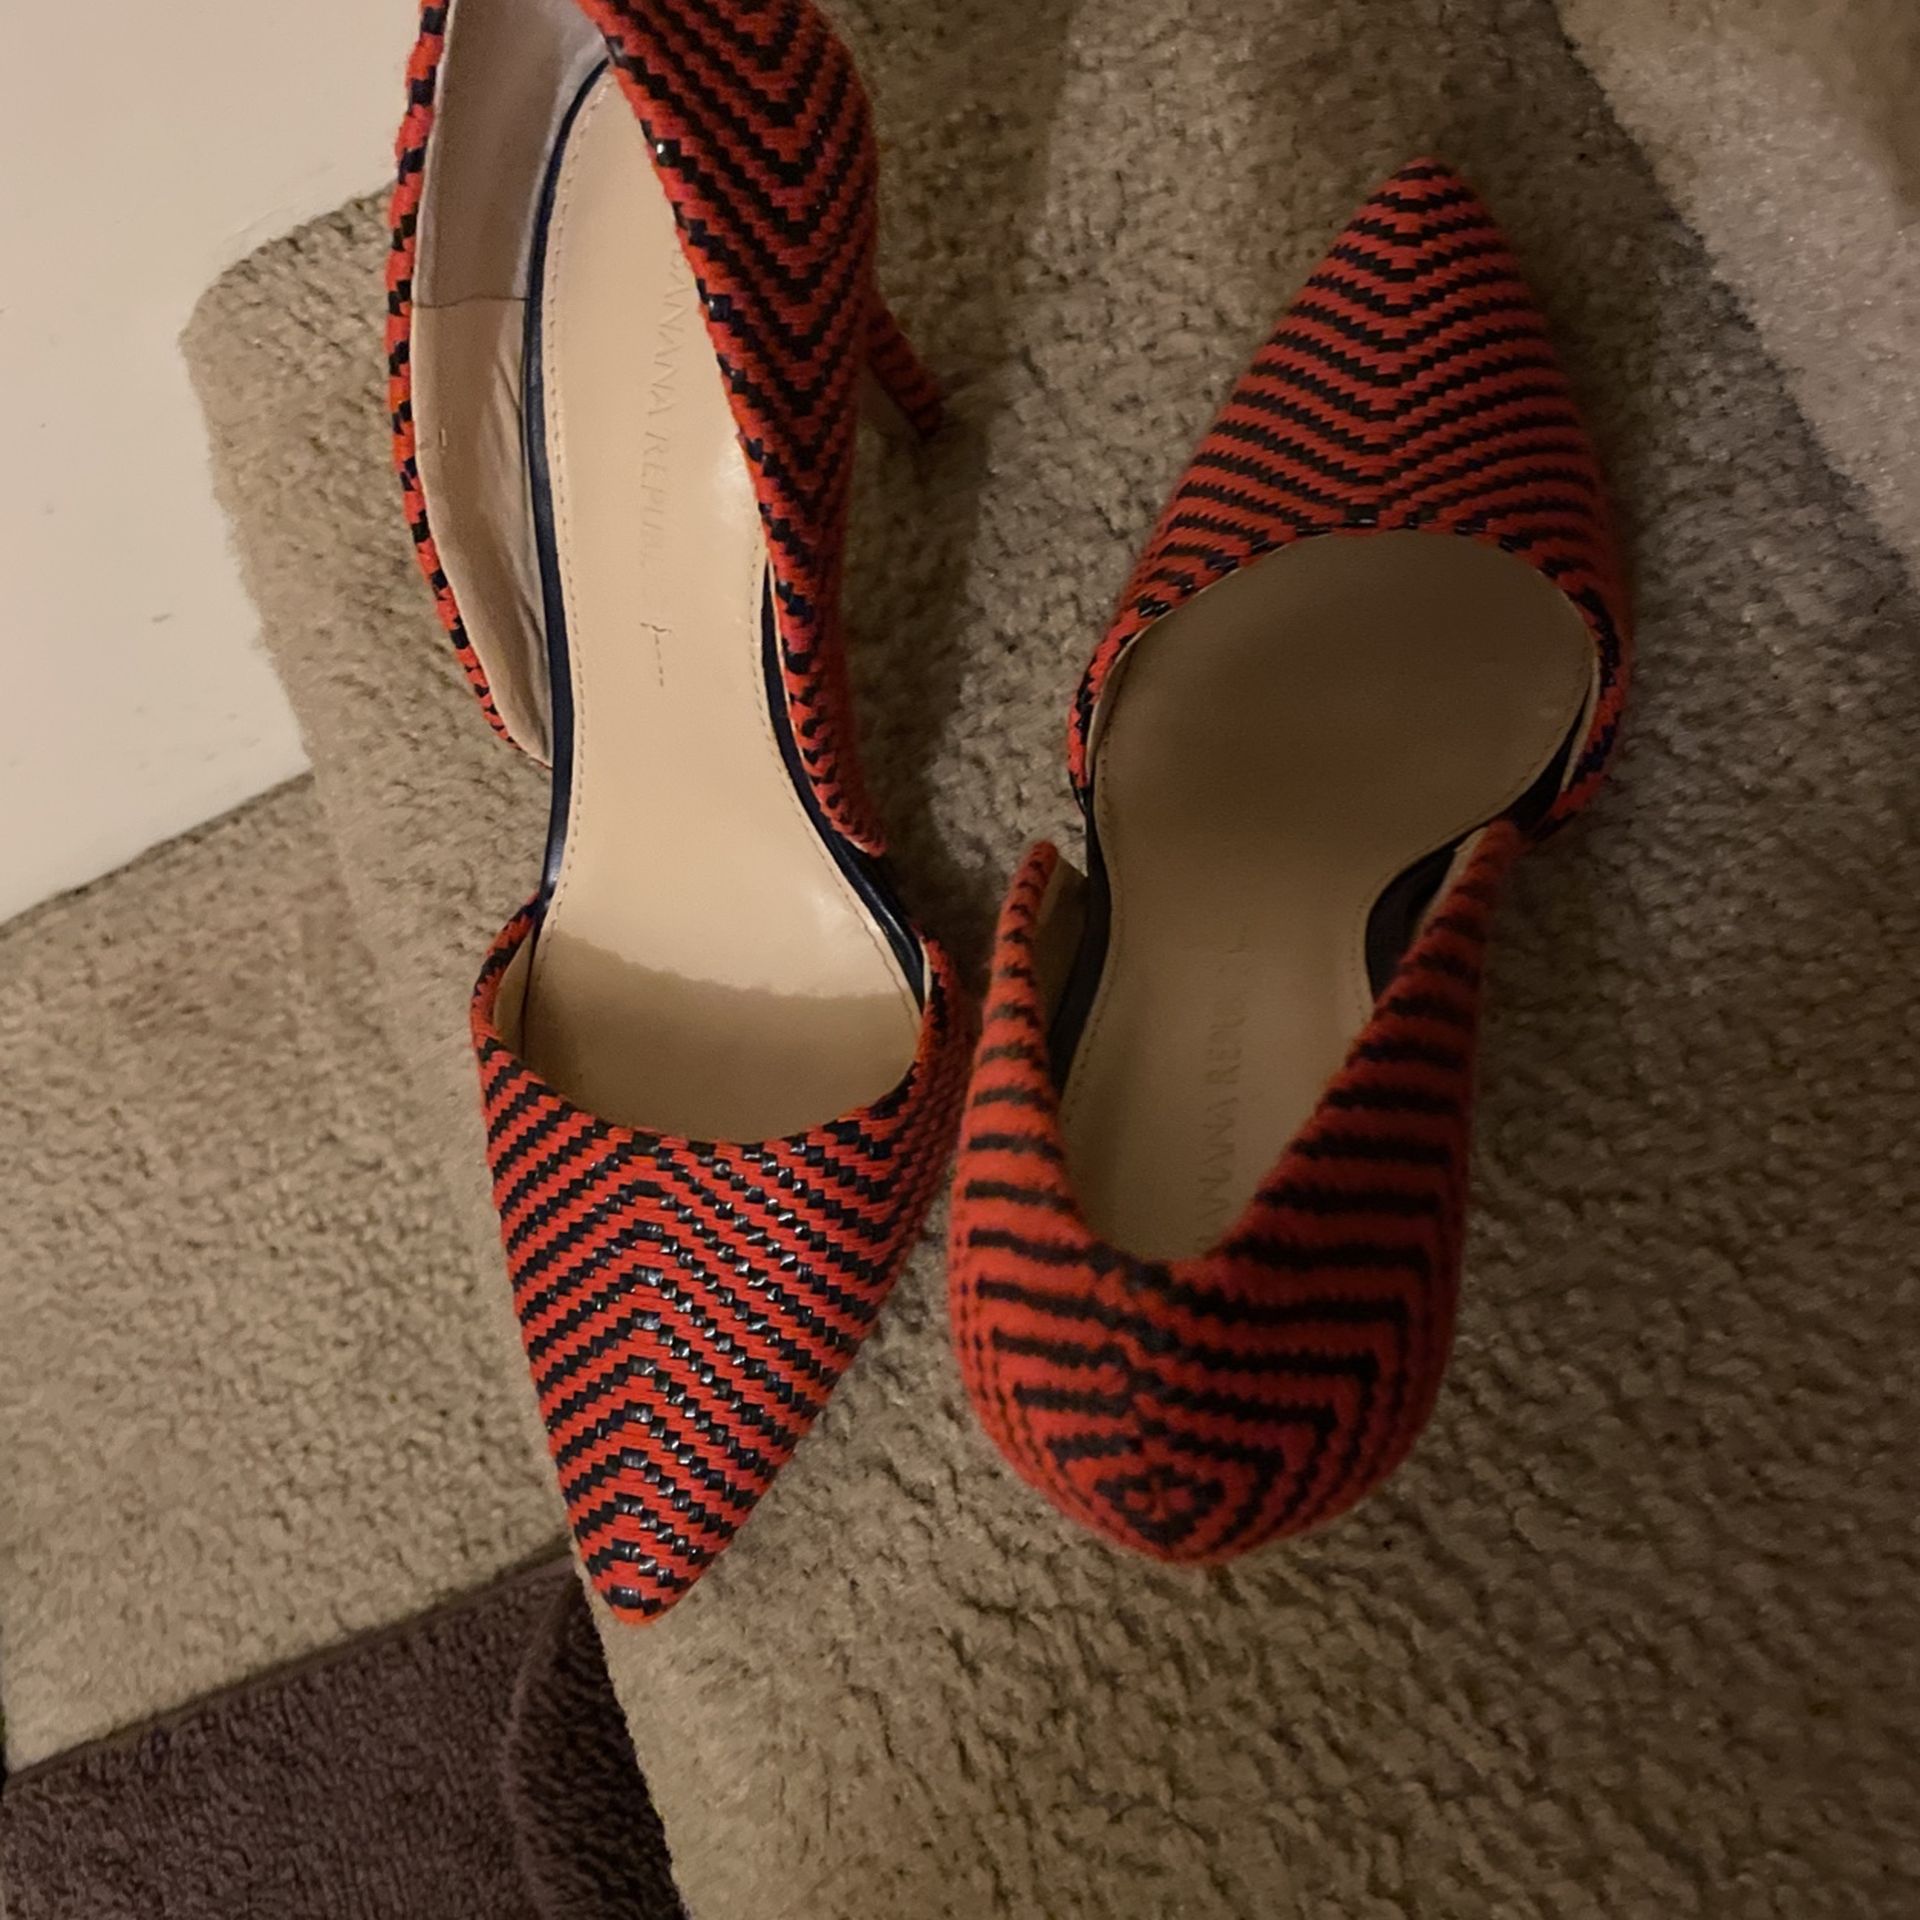 7.5 gorgeous 👠 heels, used like  new condt.—Banana Republic